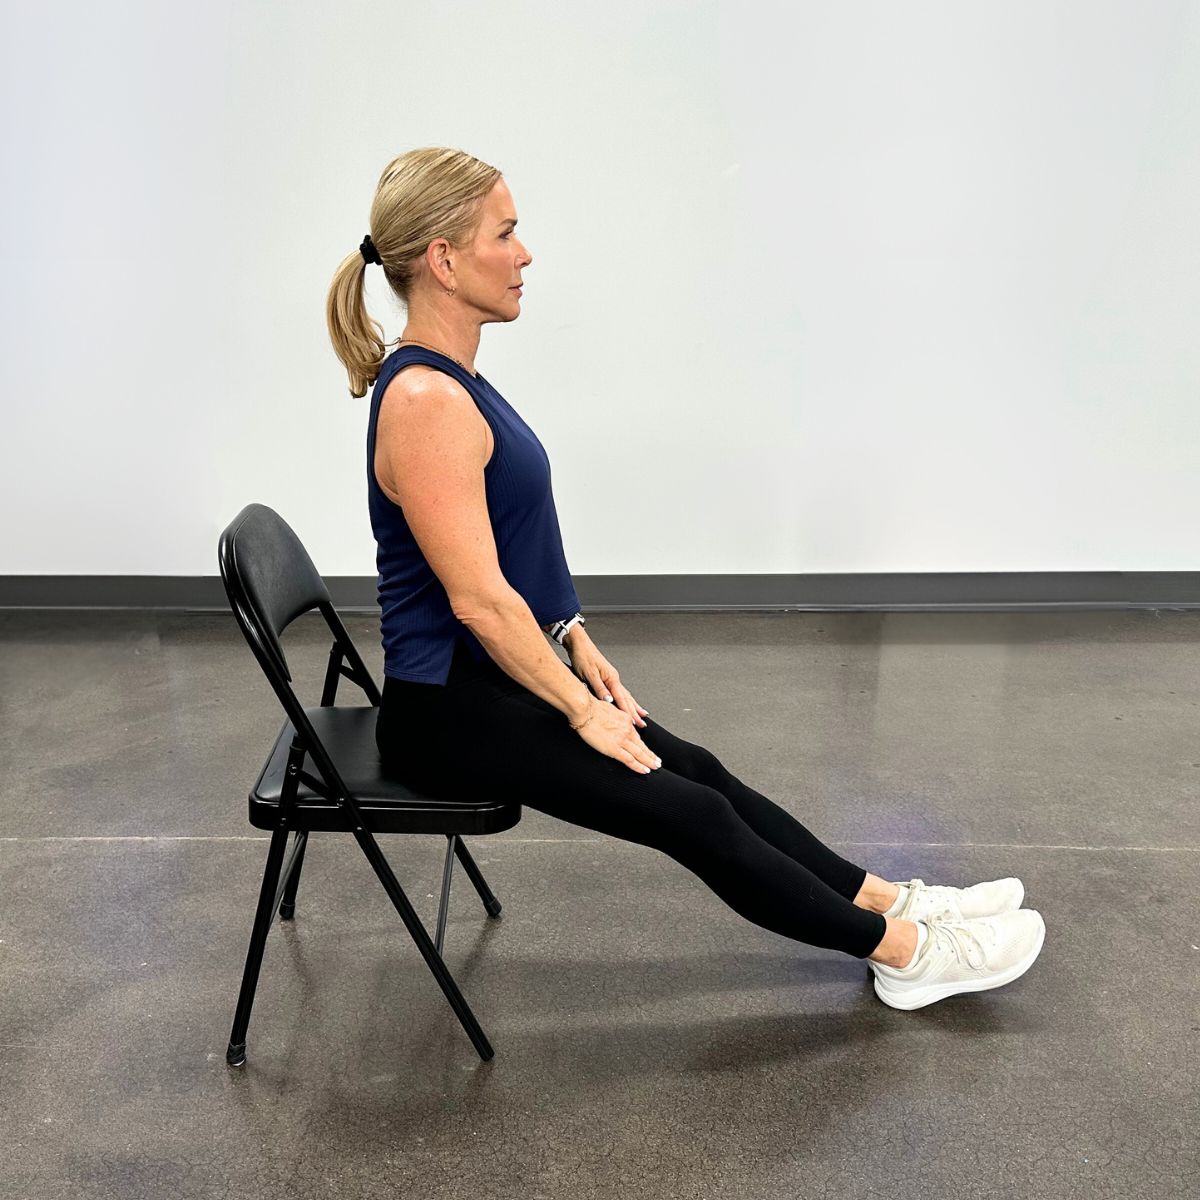 Beginner Total Body Chair Workout - Seated Workout to Build Strength and  Endurance